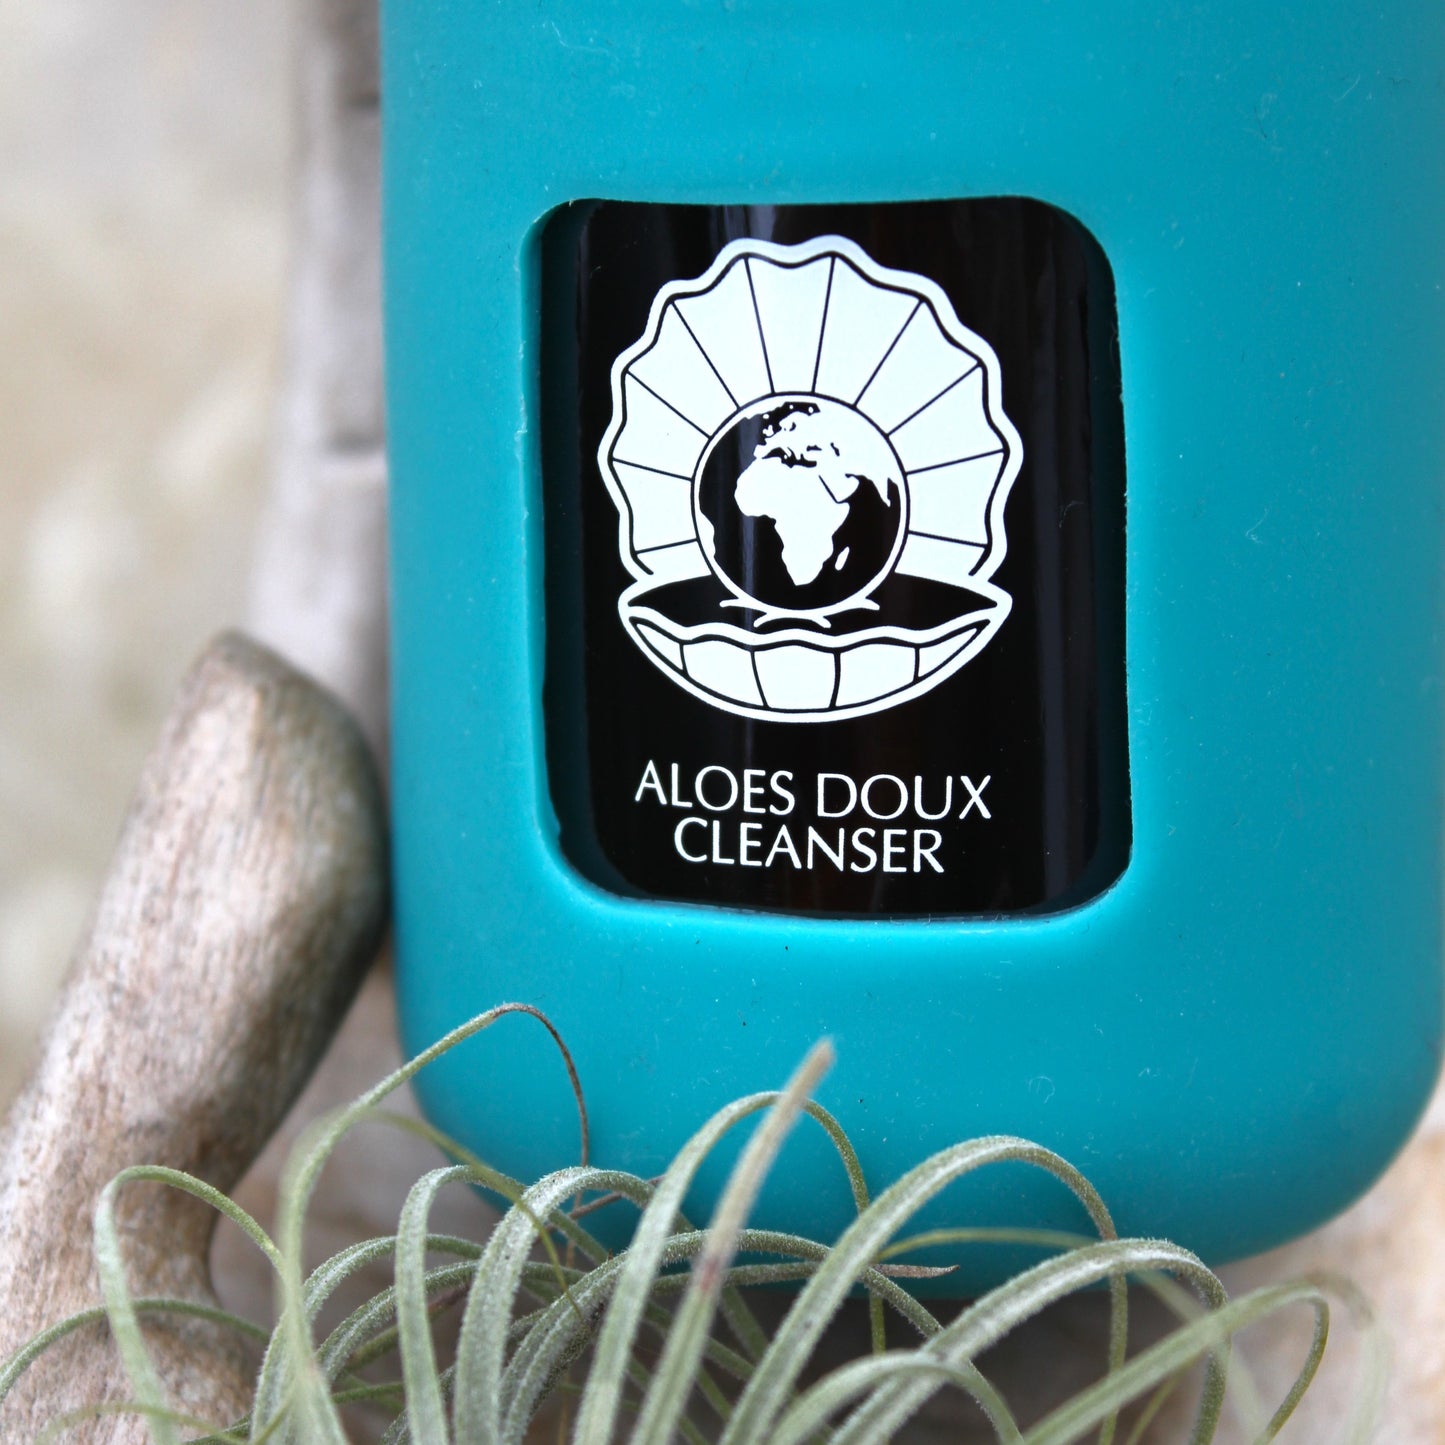 Aloes Doux Cleanser